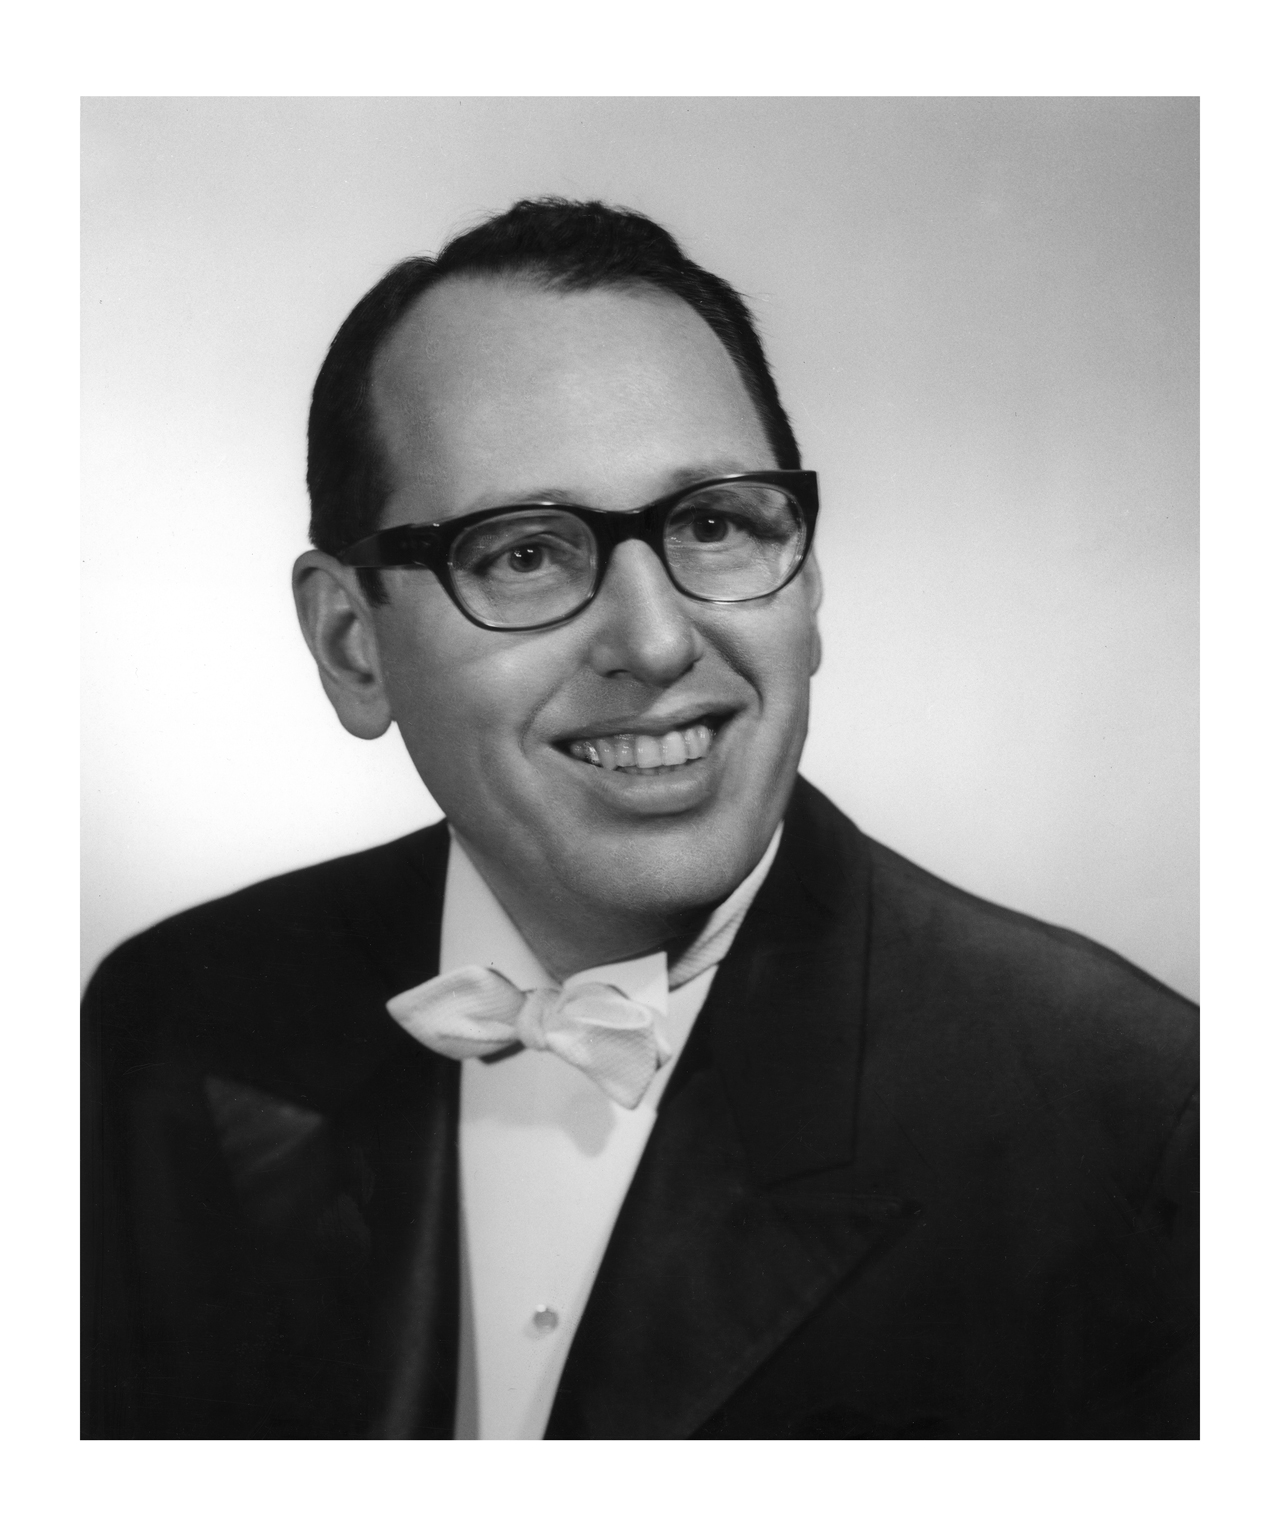 Krehbiel in a professional headshot for The Cleveland Orchestra